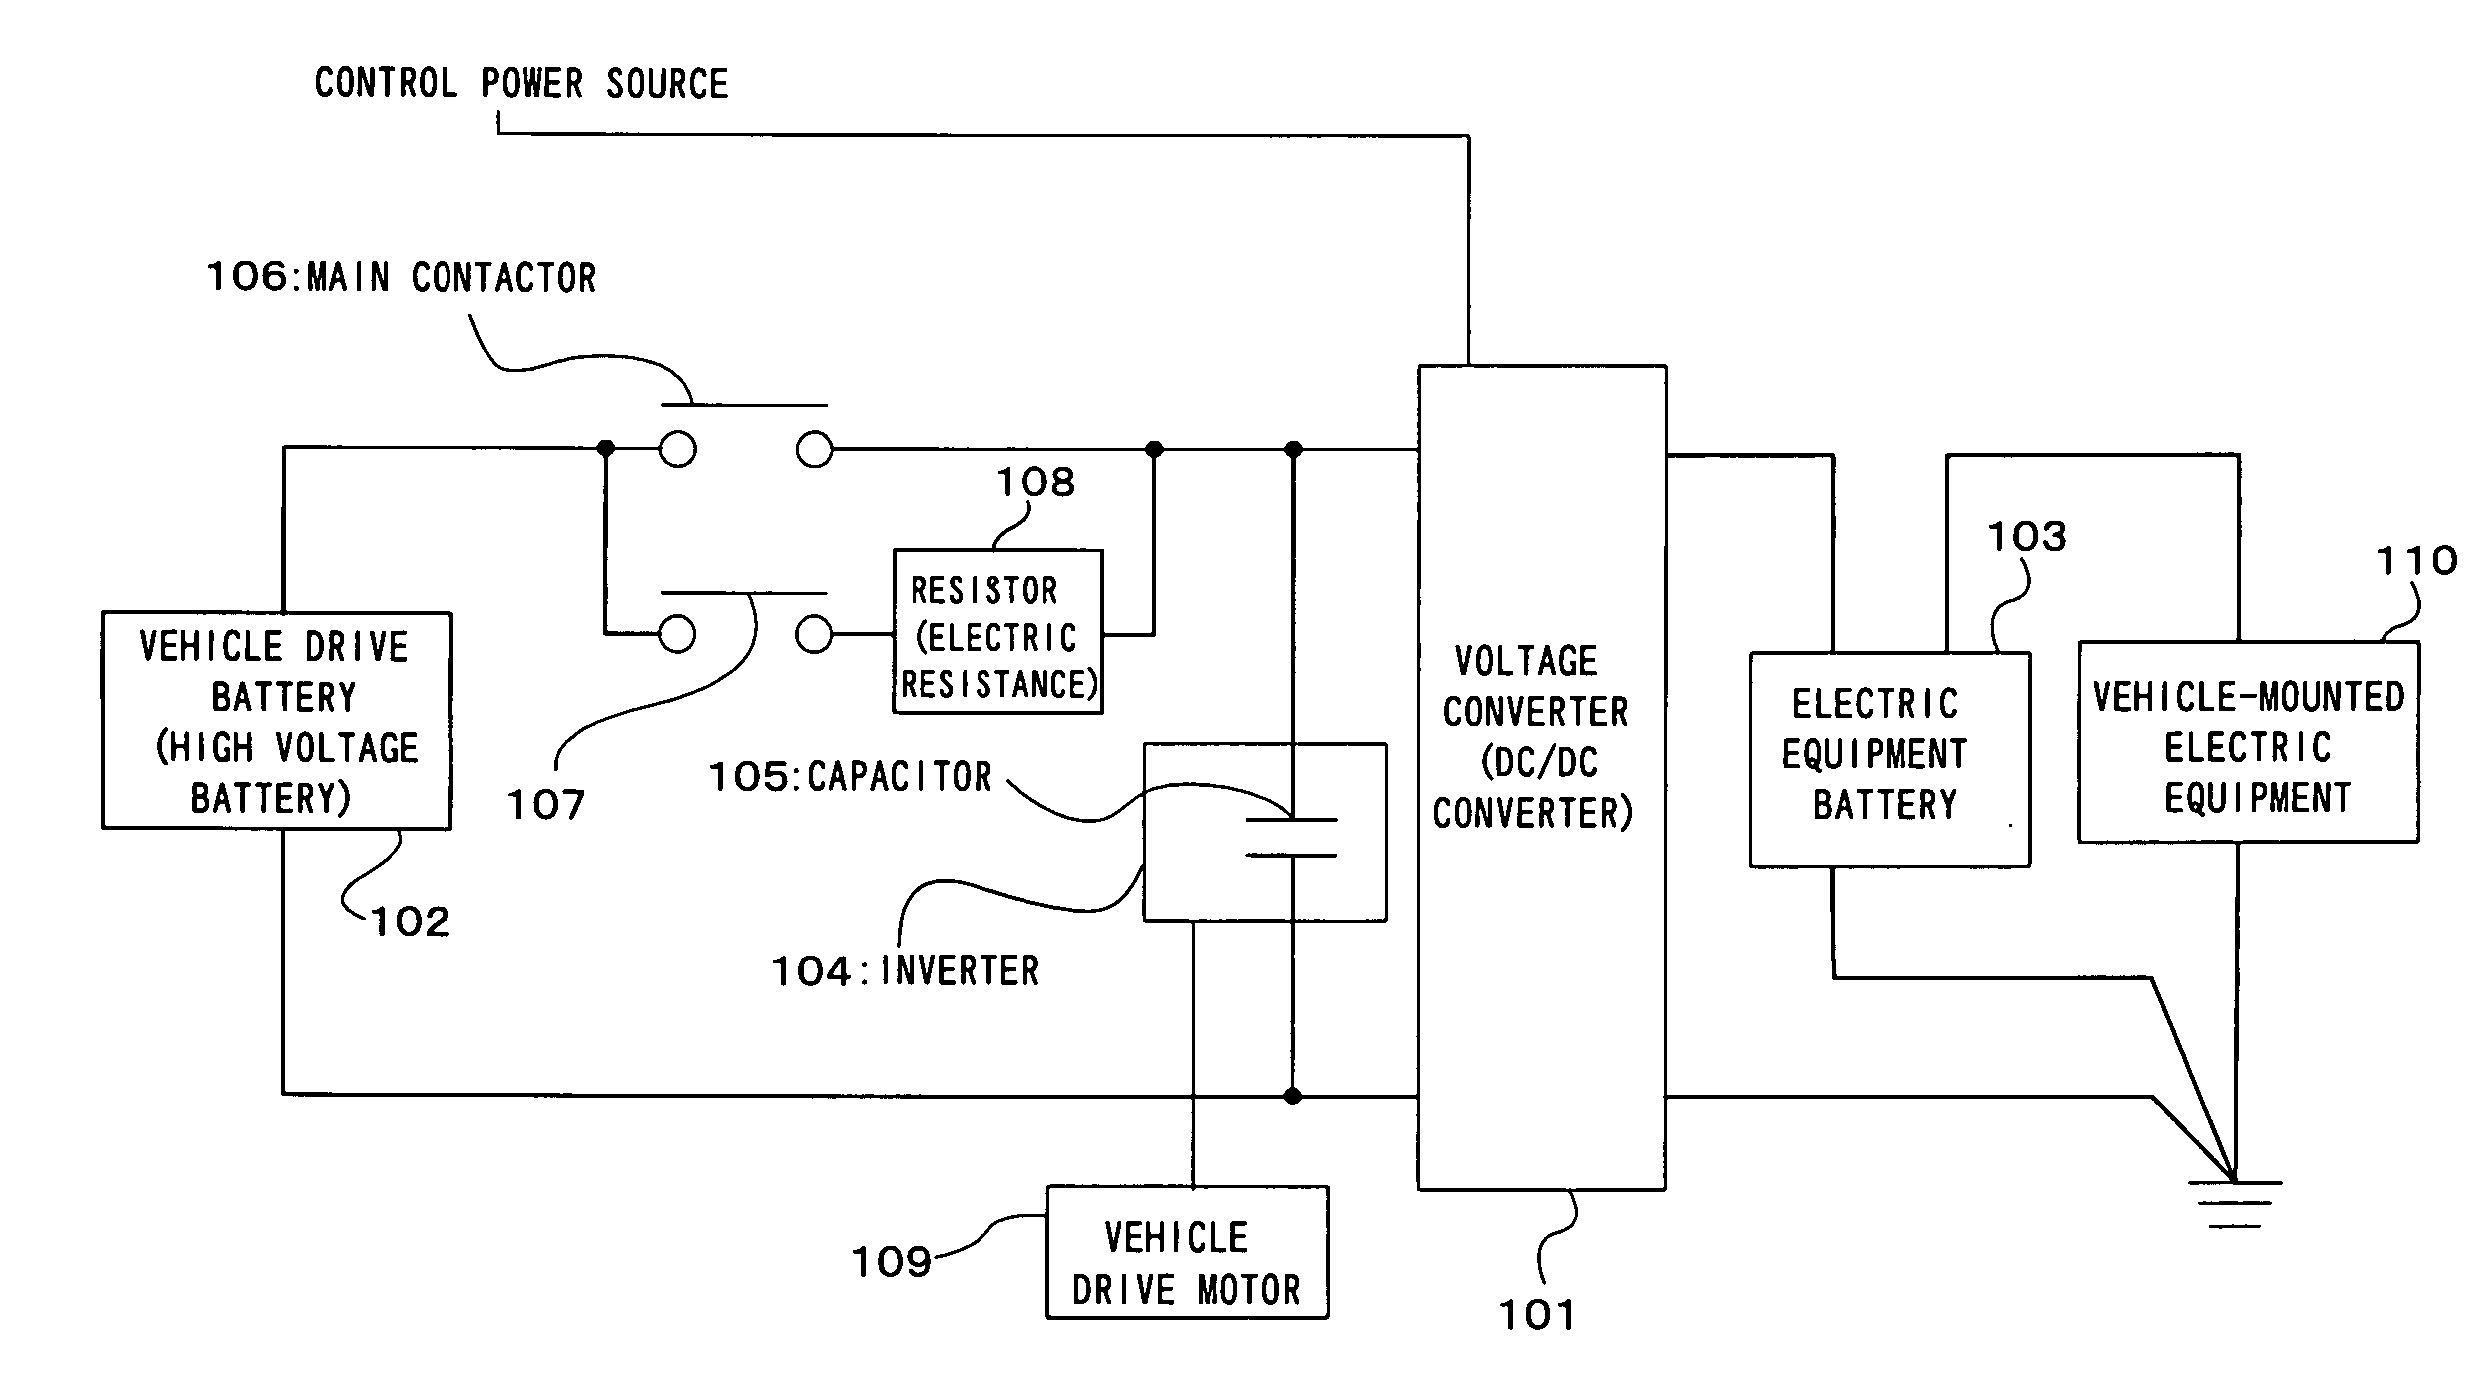 Voltage converting circuit for electric vehicles